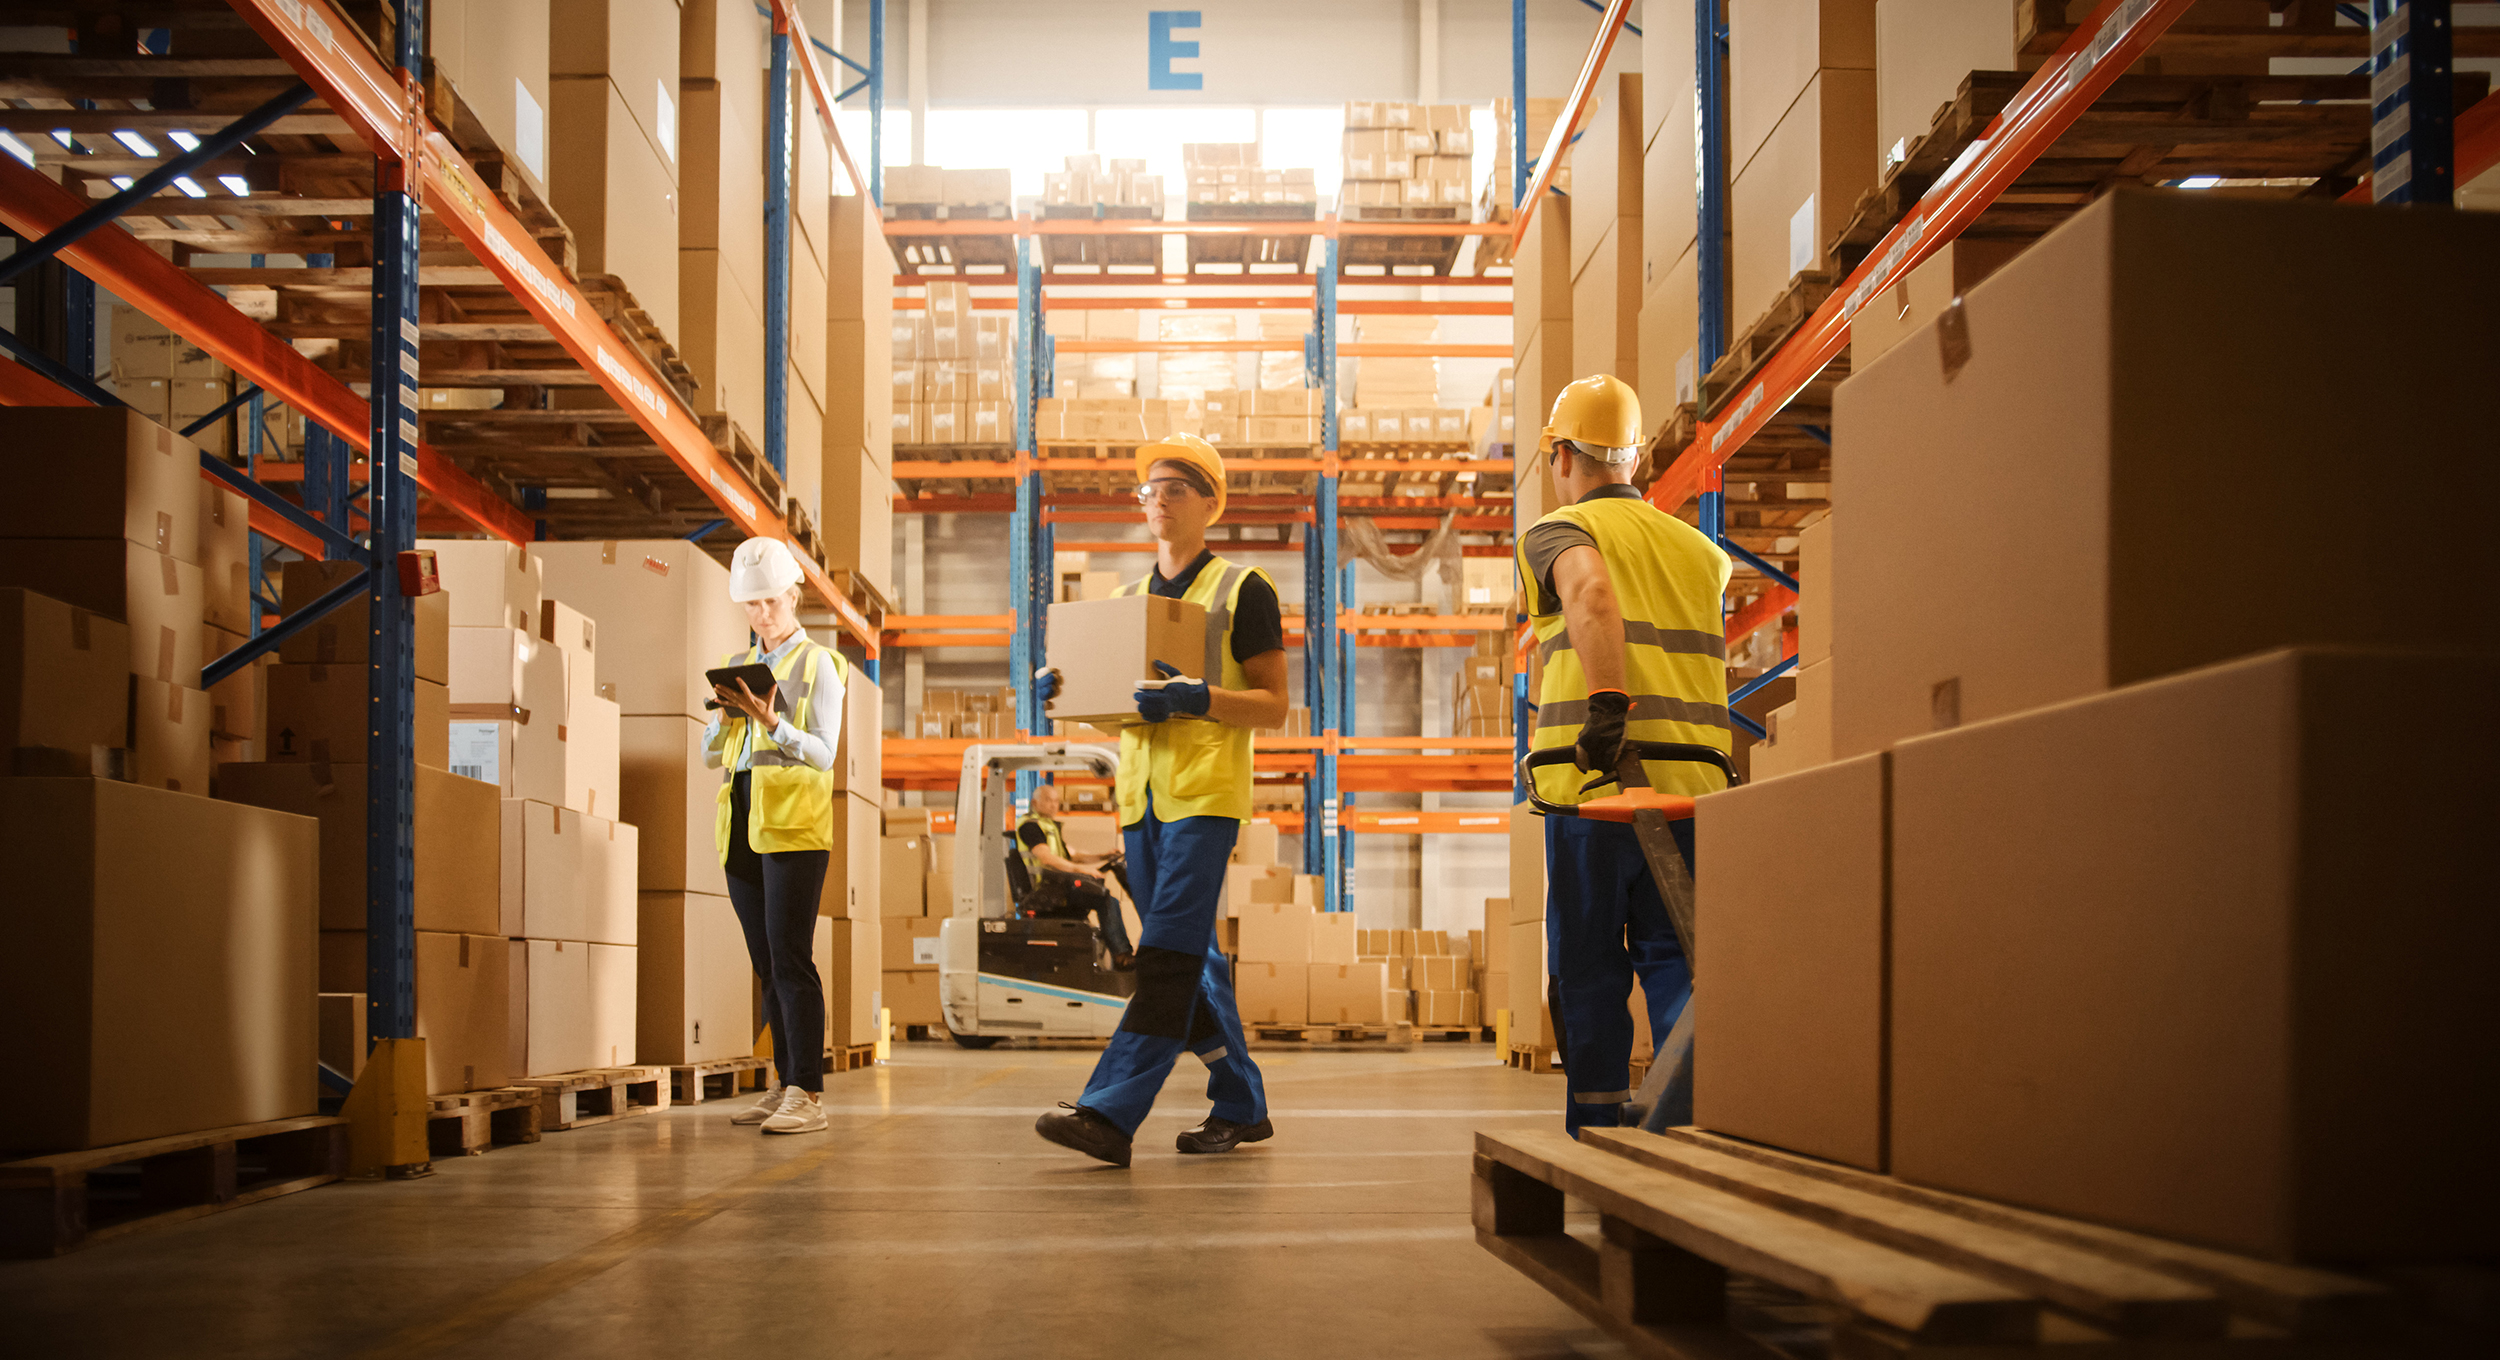 Retail Warehouse full of Shelves with Goods in Cardboard Boxes, Workers Scan and Sort Packages, Move Inventory with Pallet Trucks and Forklifts. Product Distribution Logistics Center.